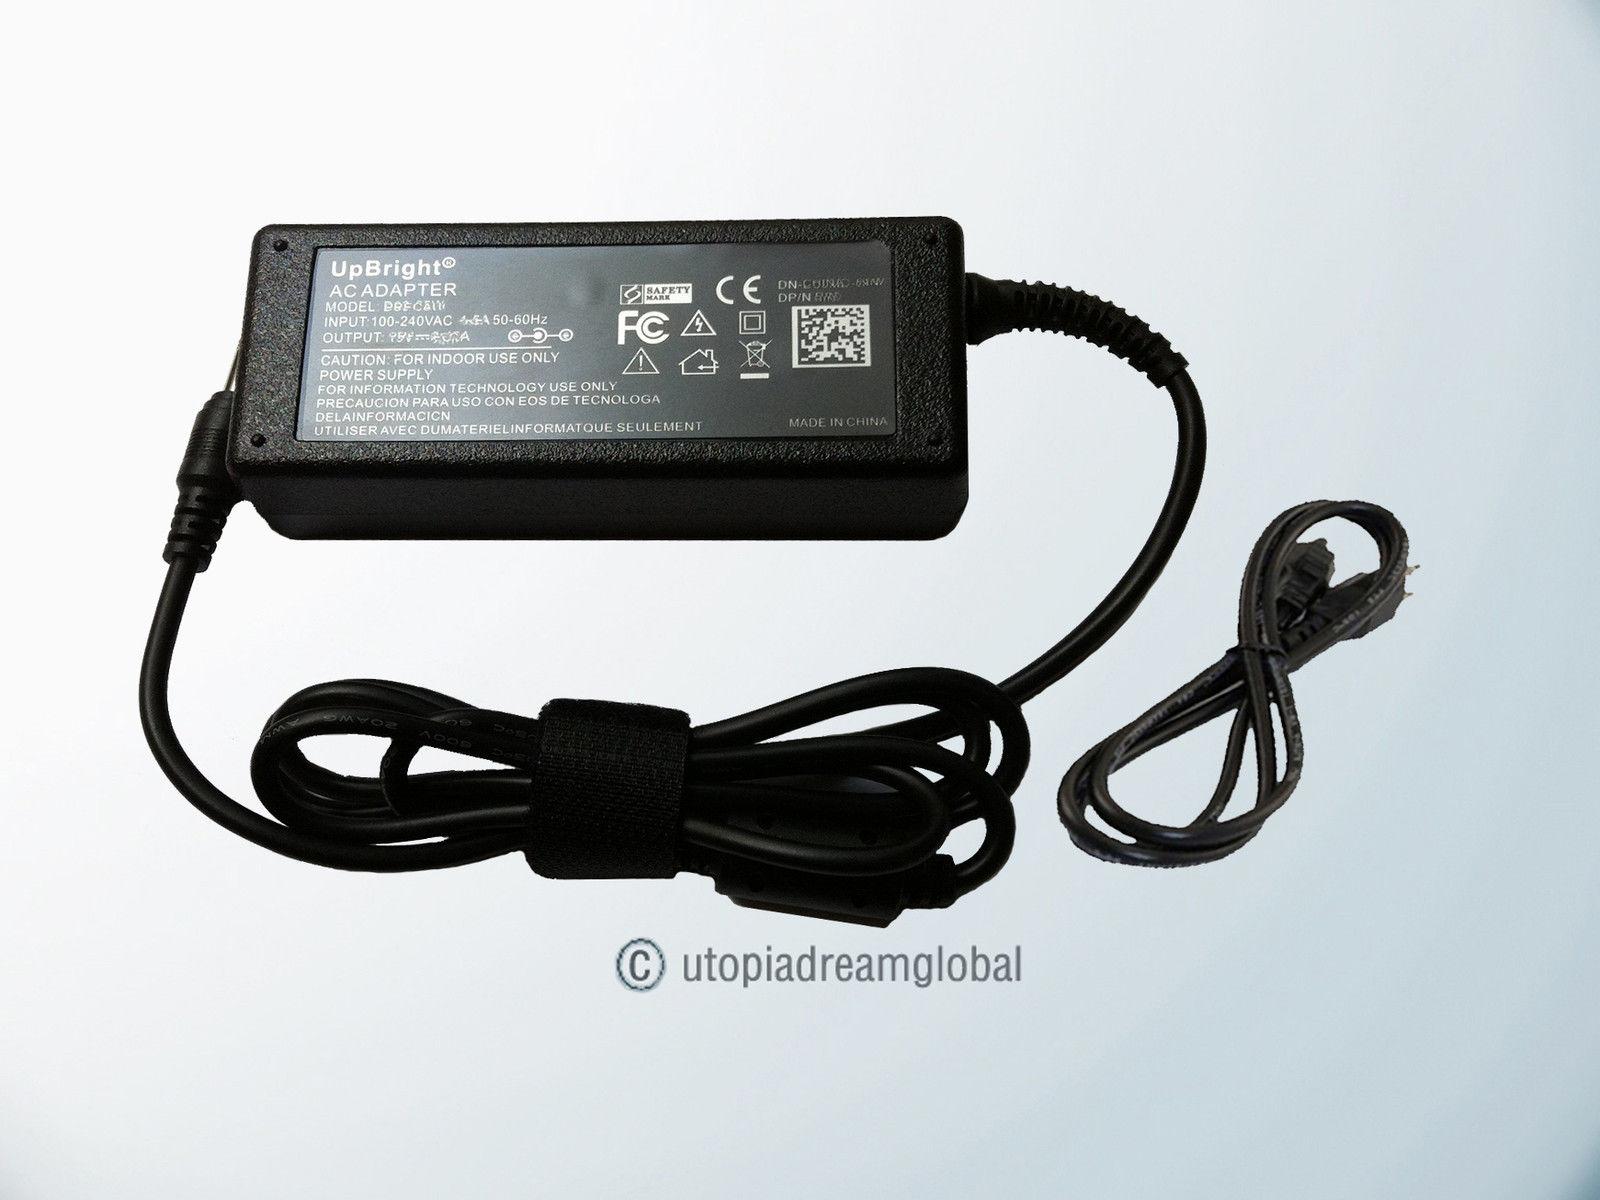 Notebook AC Adapter For Gateway NEW95 NV53A52U Laptop Power Supp - Click Image to Close